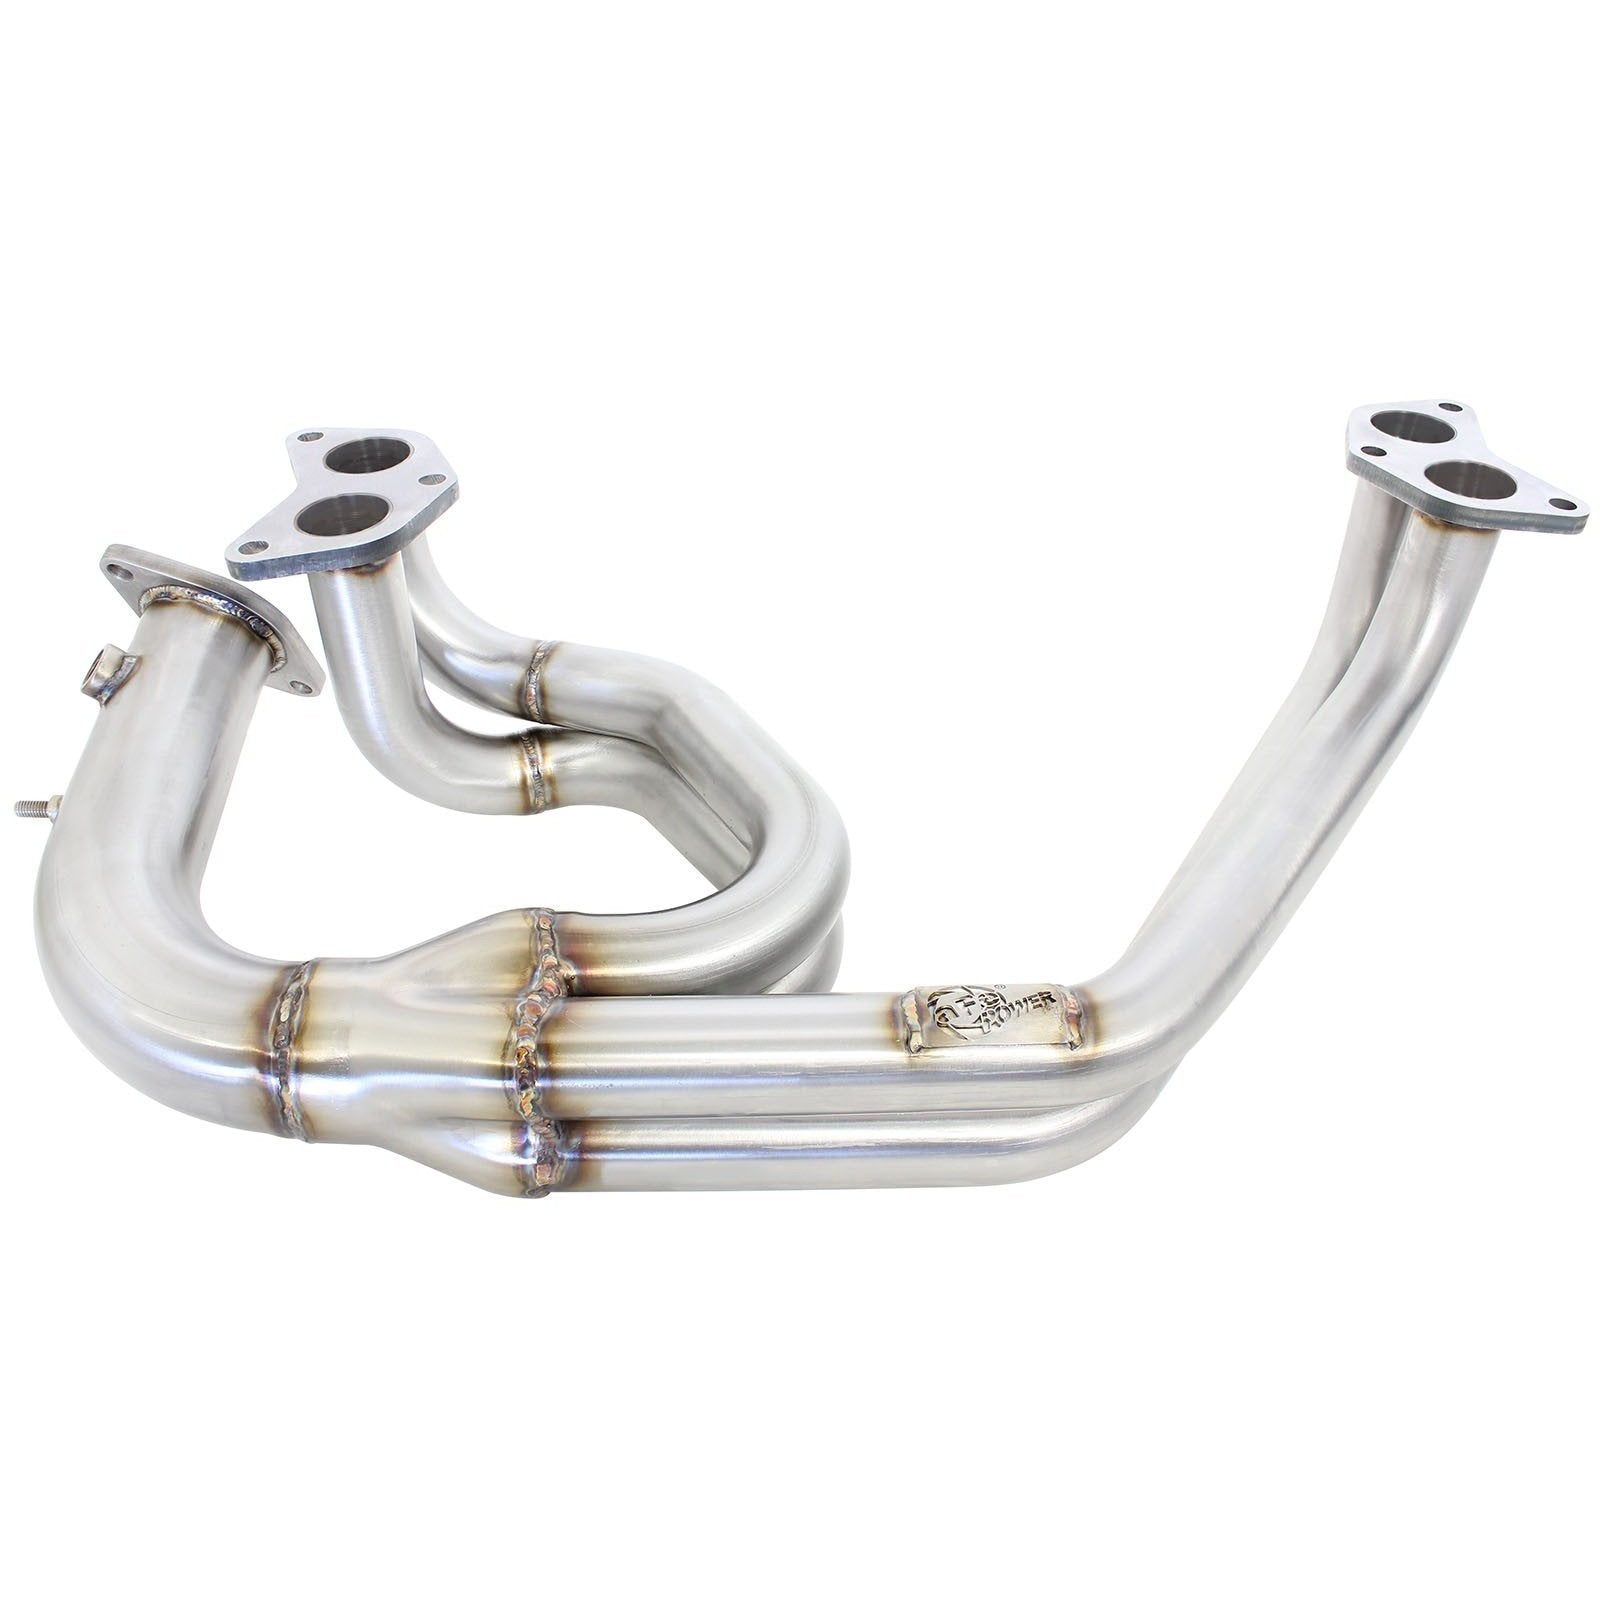 aFe Twisted Steel Header Subaru STI 2004-2020 / WRX 2002-2014 (48-36802)-afe48-36802-48-36802-Exhaust Headers and Manifolds-aFe-JDMuscle